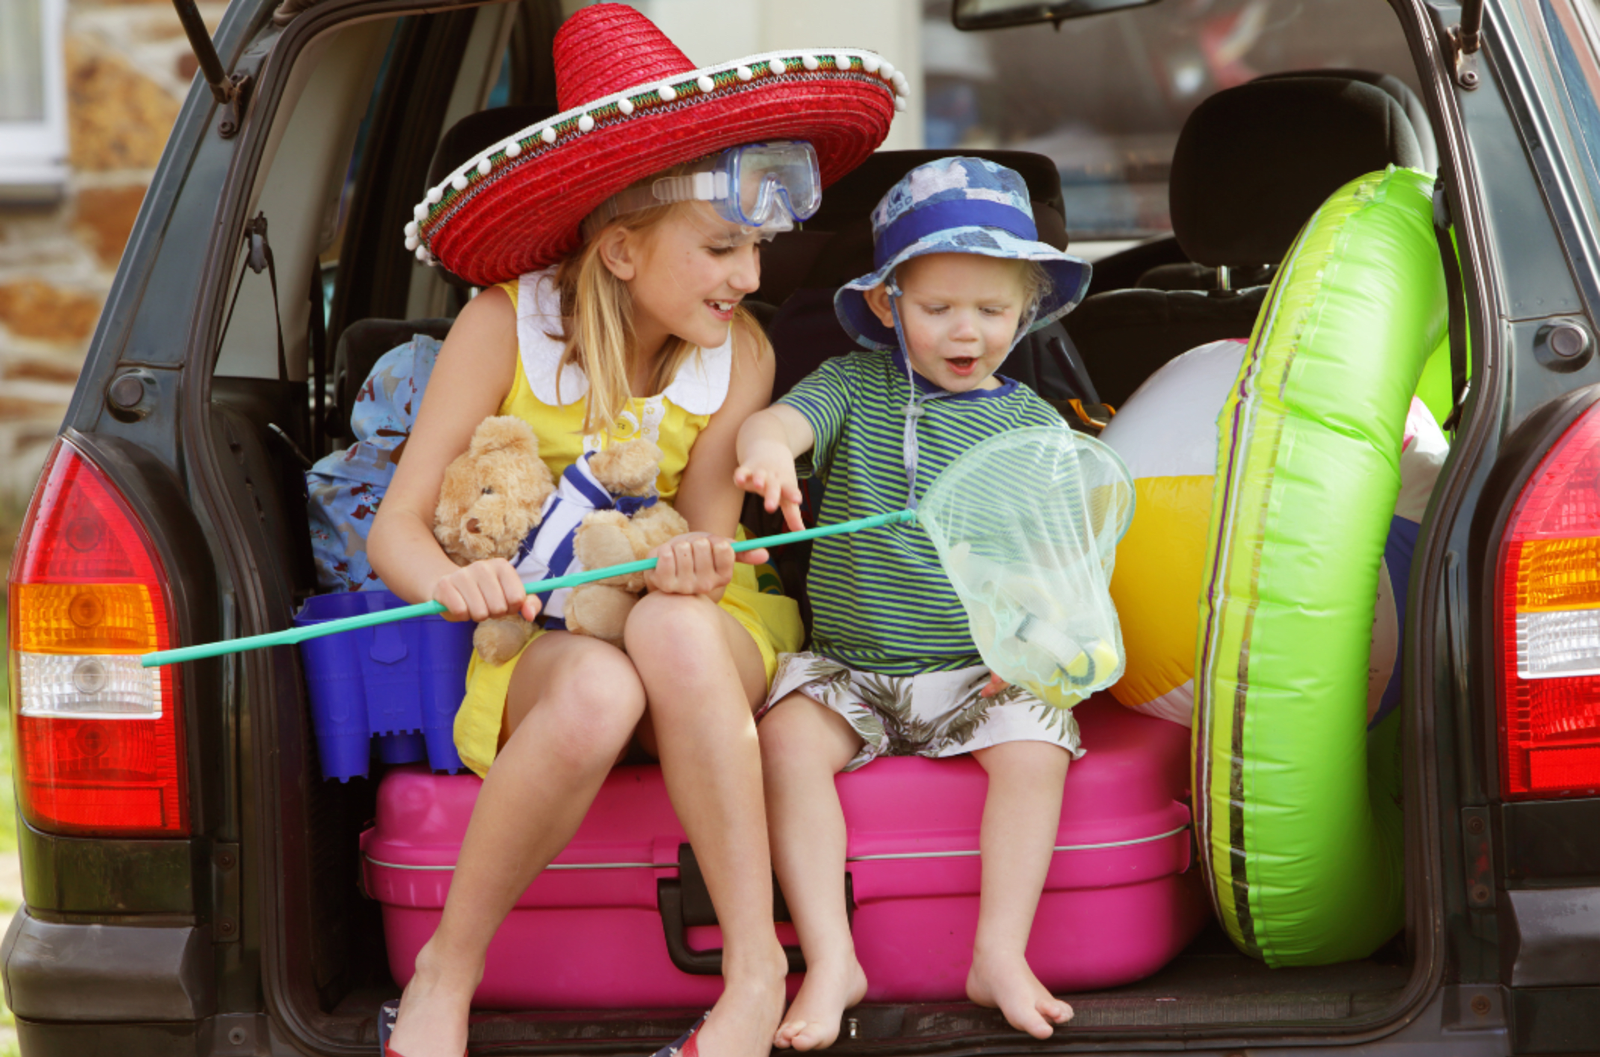 Two young children sitting in the back of a car packed up for a holiday